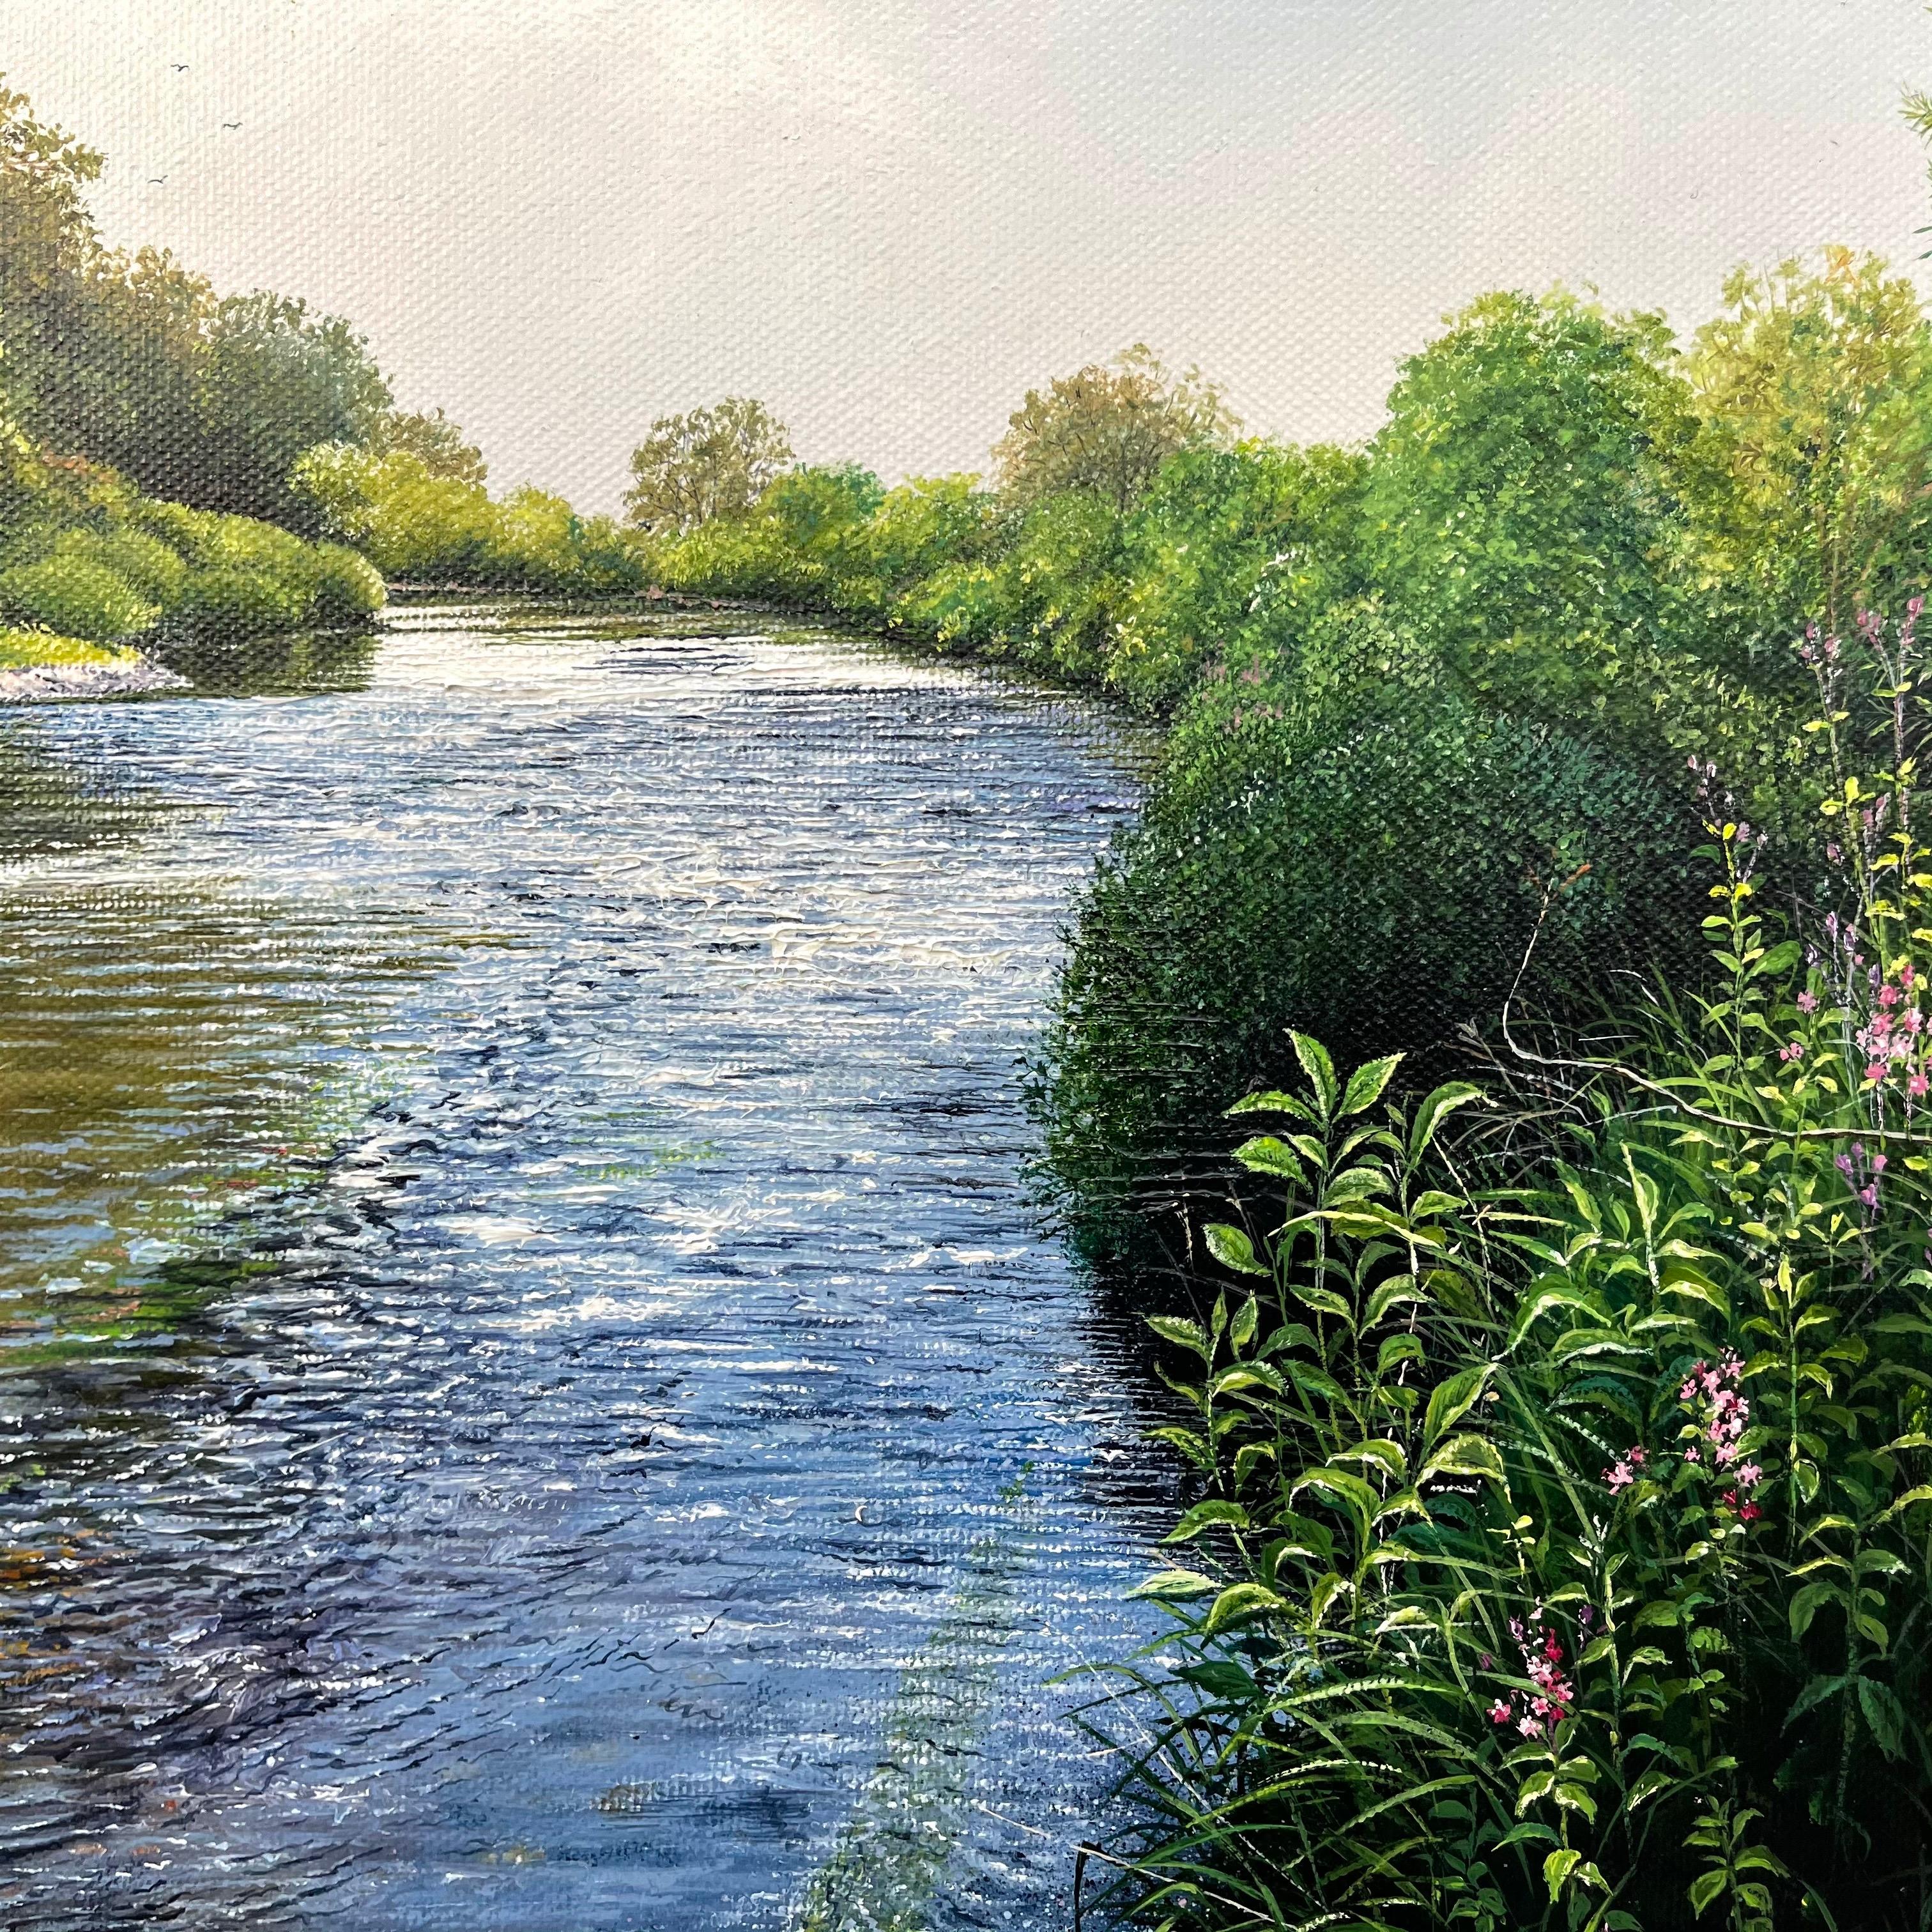 Light Reflections on the River Landscape Painting by British Photorealist Artist 6